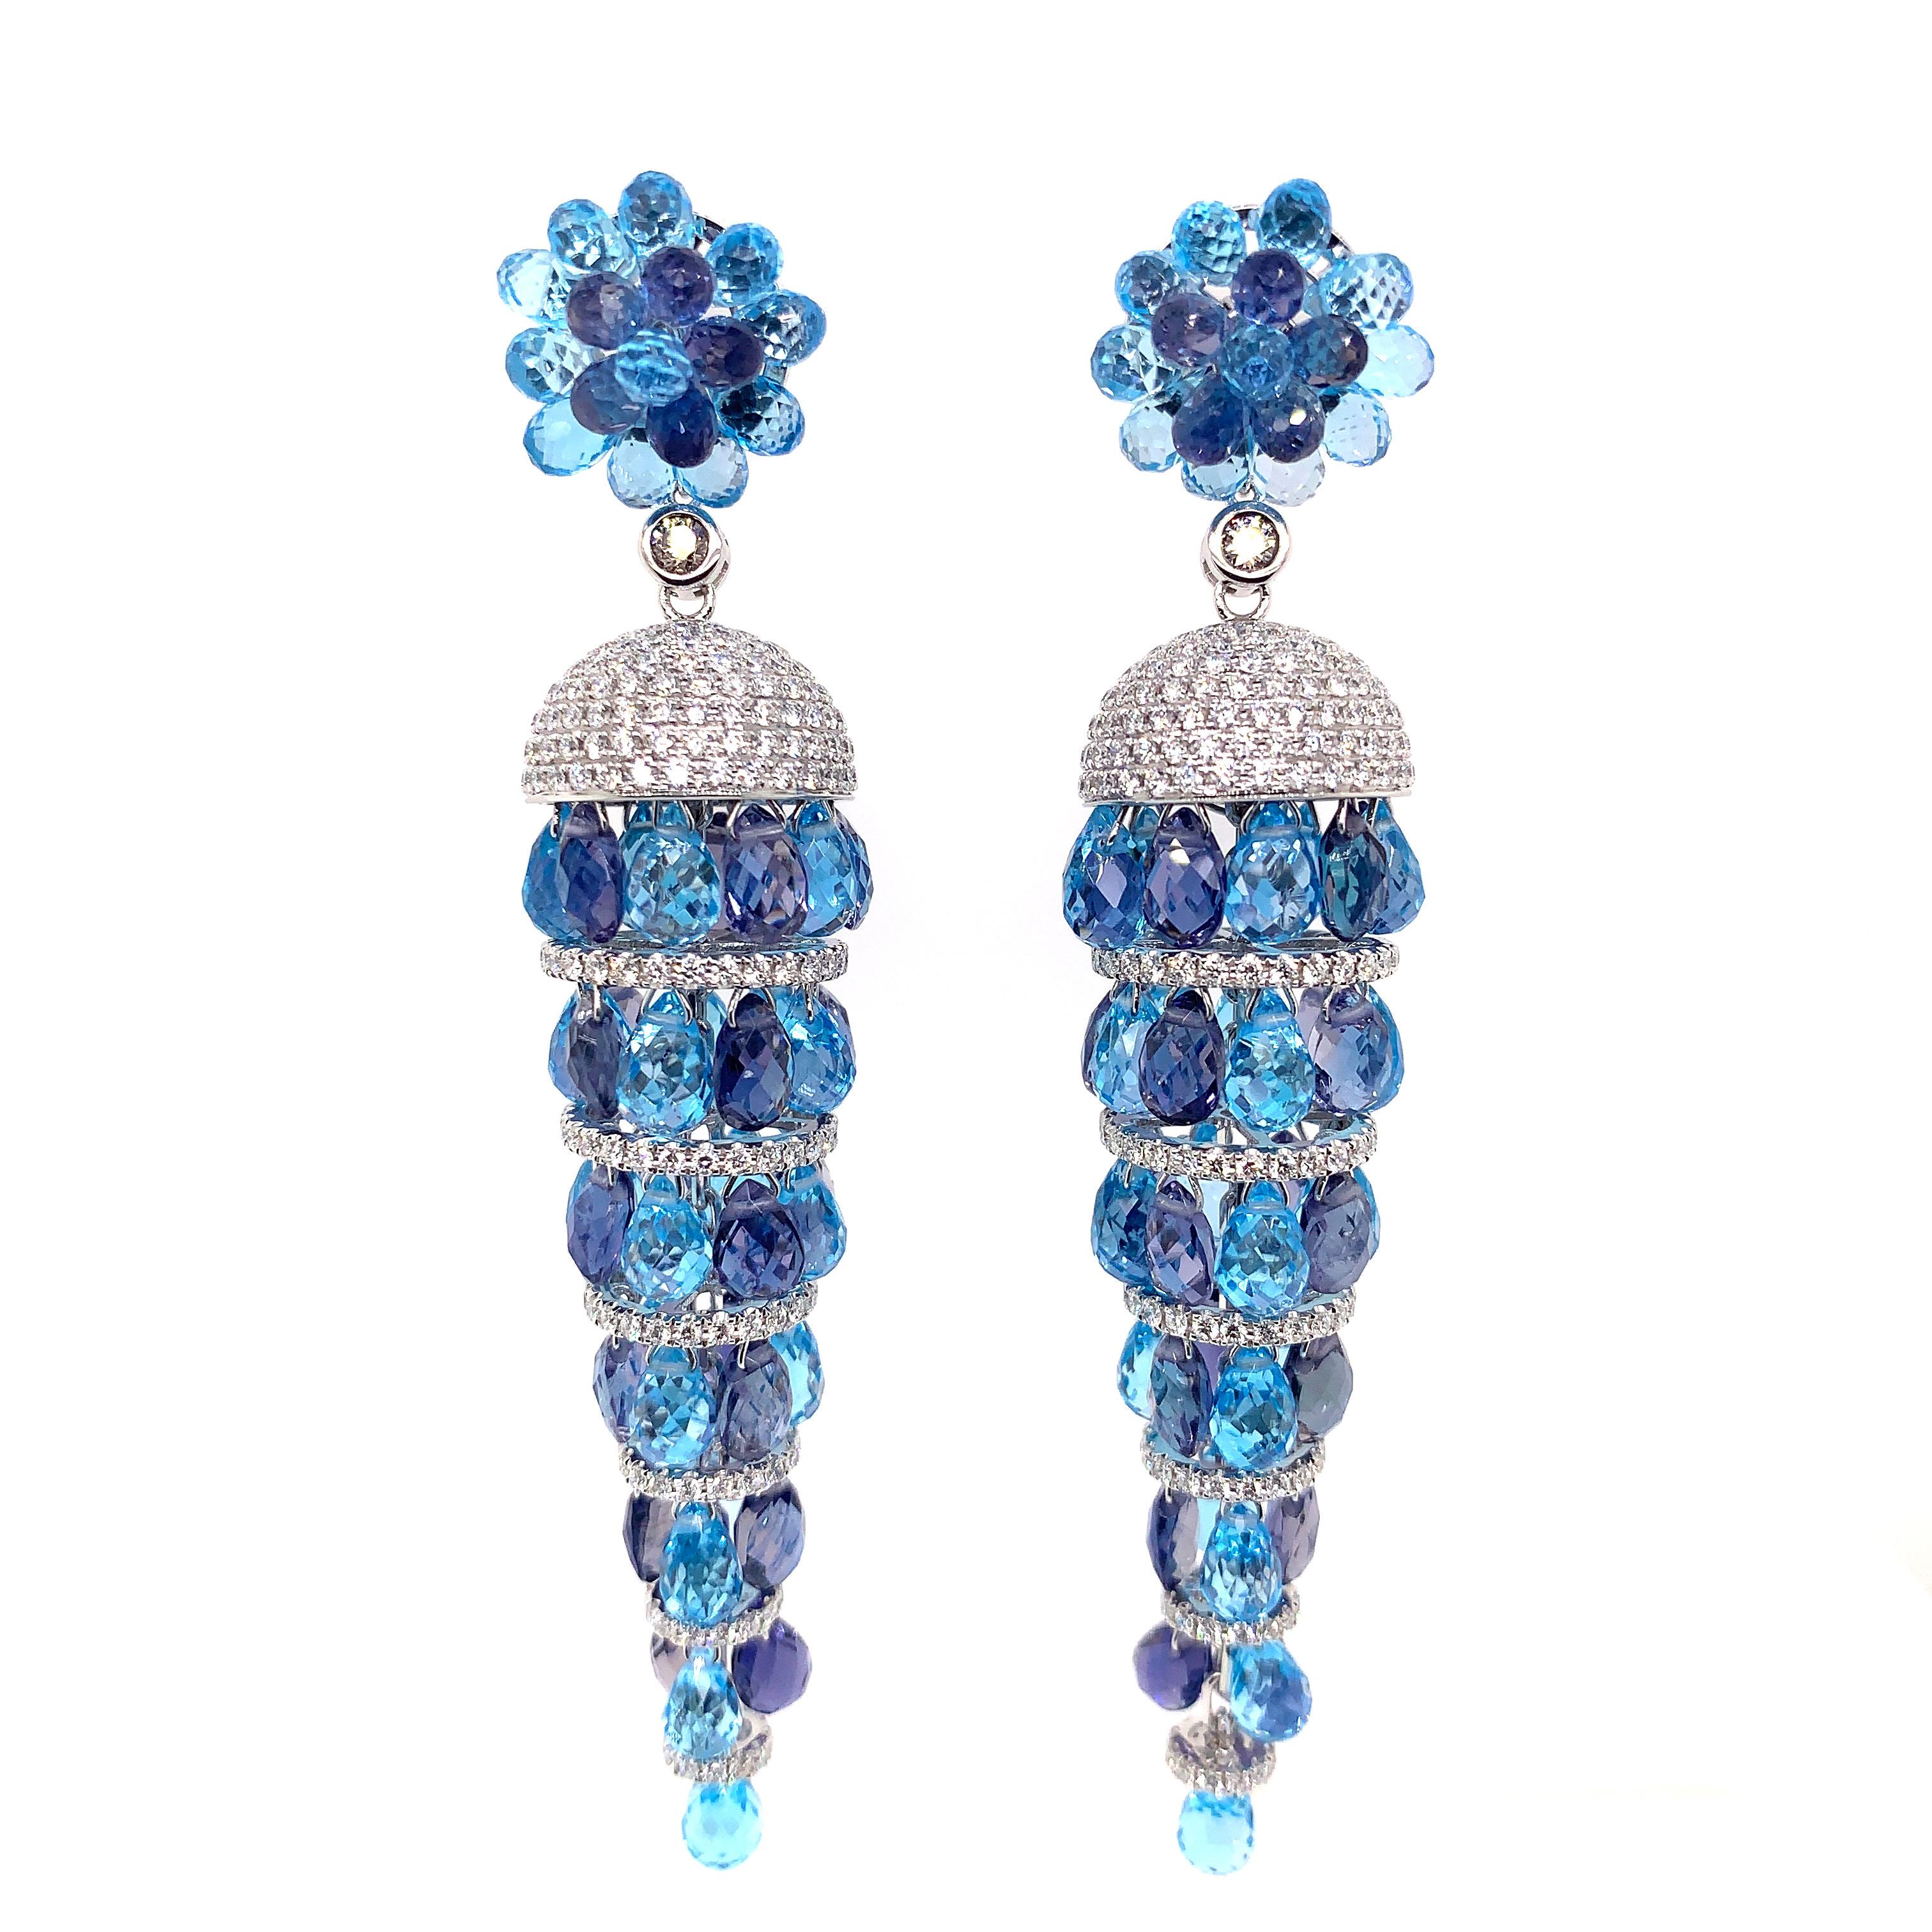 Glamorous Gemstones - Sunita Nahata started off her career as a gemstone trader, and this particular collection reflects her love for multi-coloured semi-precious gemstones. Here Sunita presents a unique pairing of swiss blue topaz with iolite to